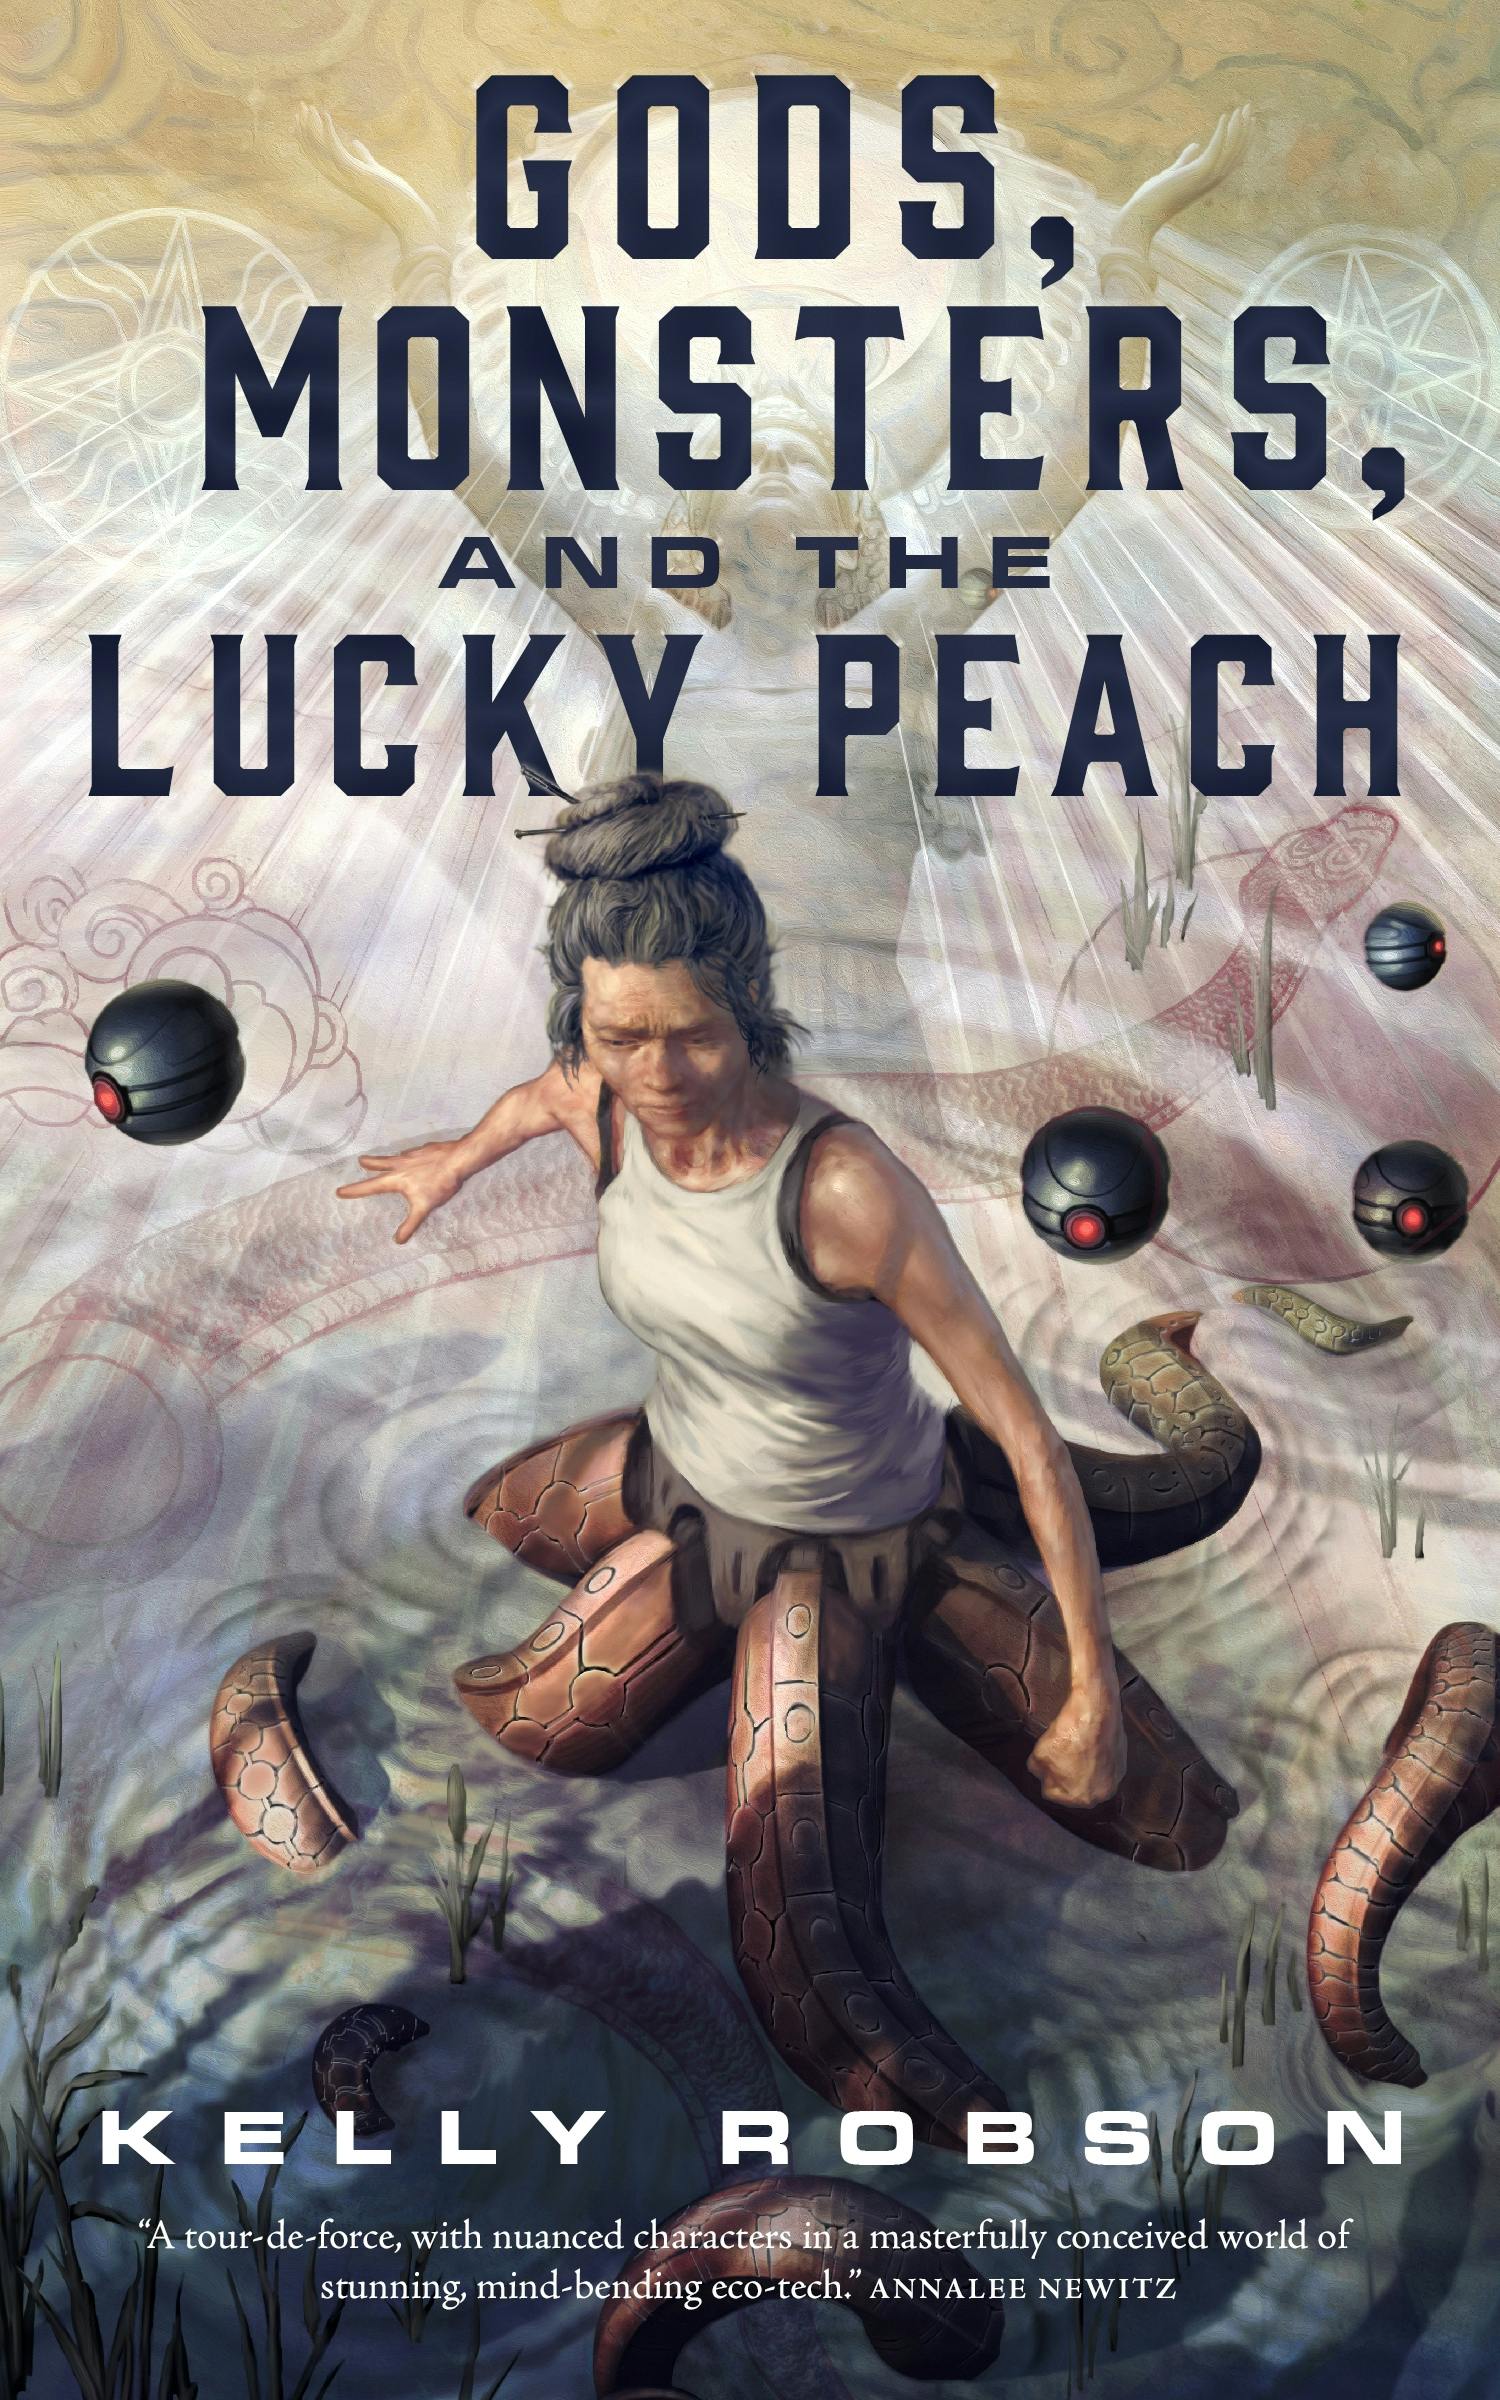 gods monsters and the lucky peach by kelly robson